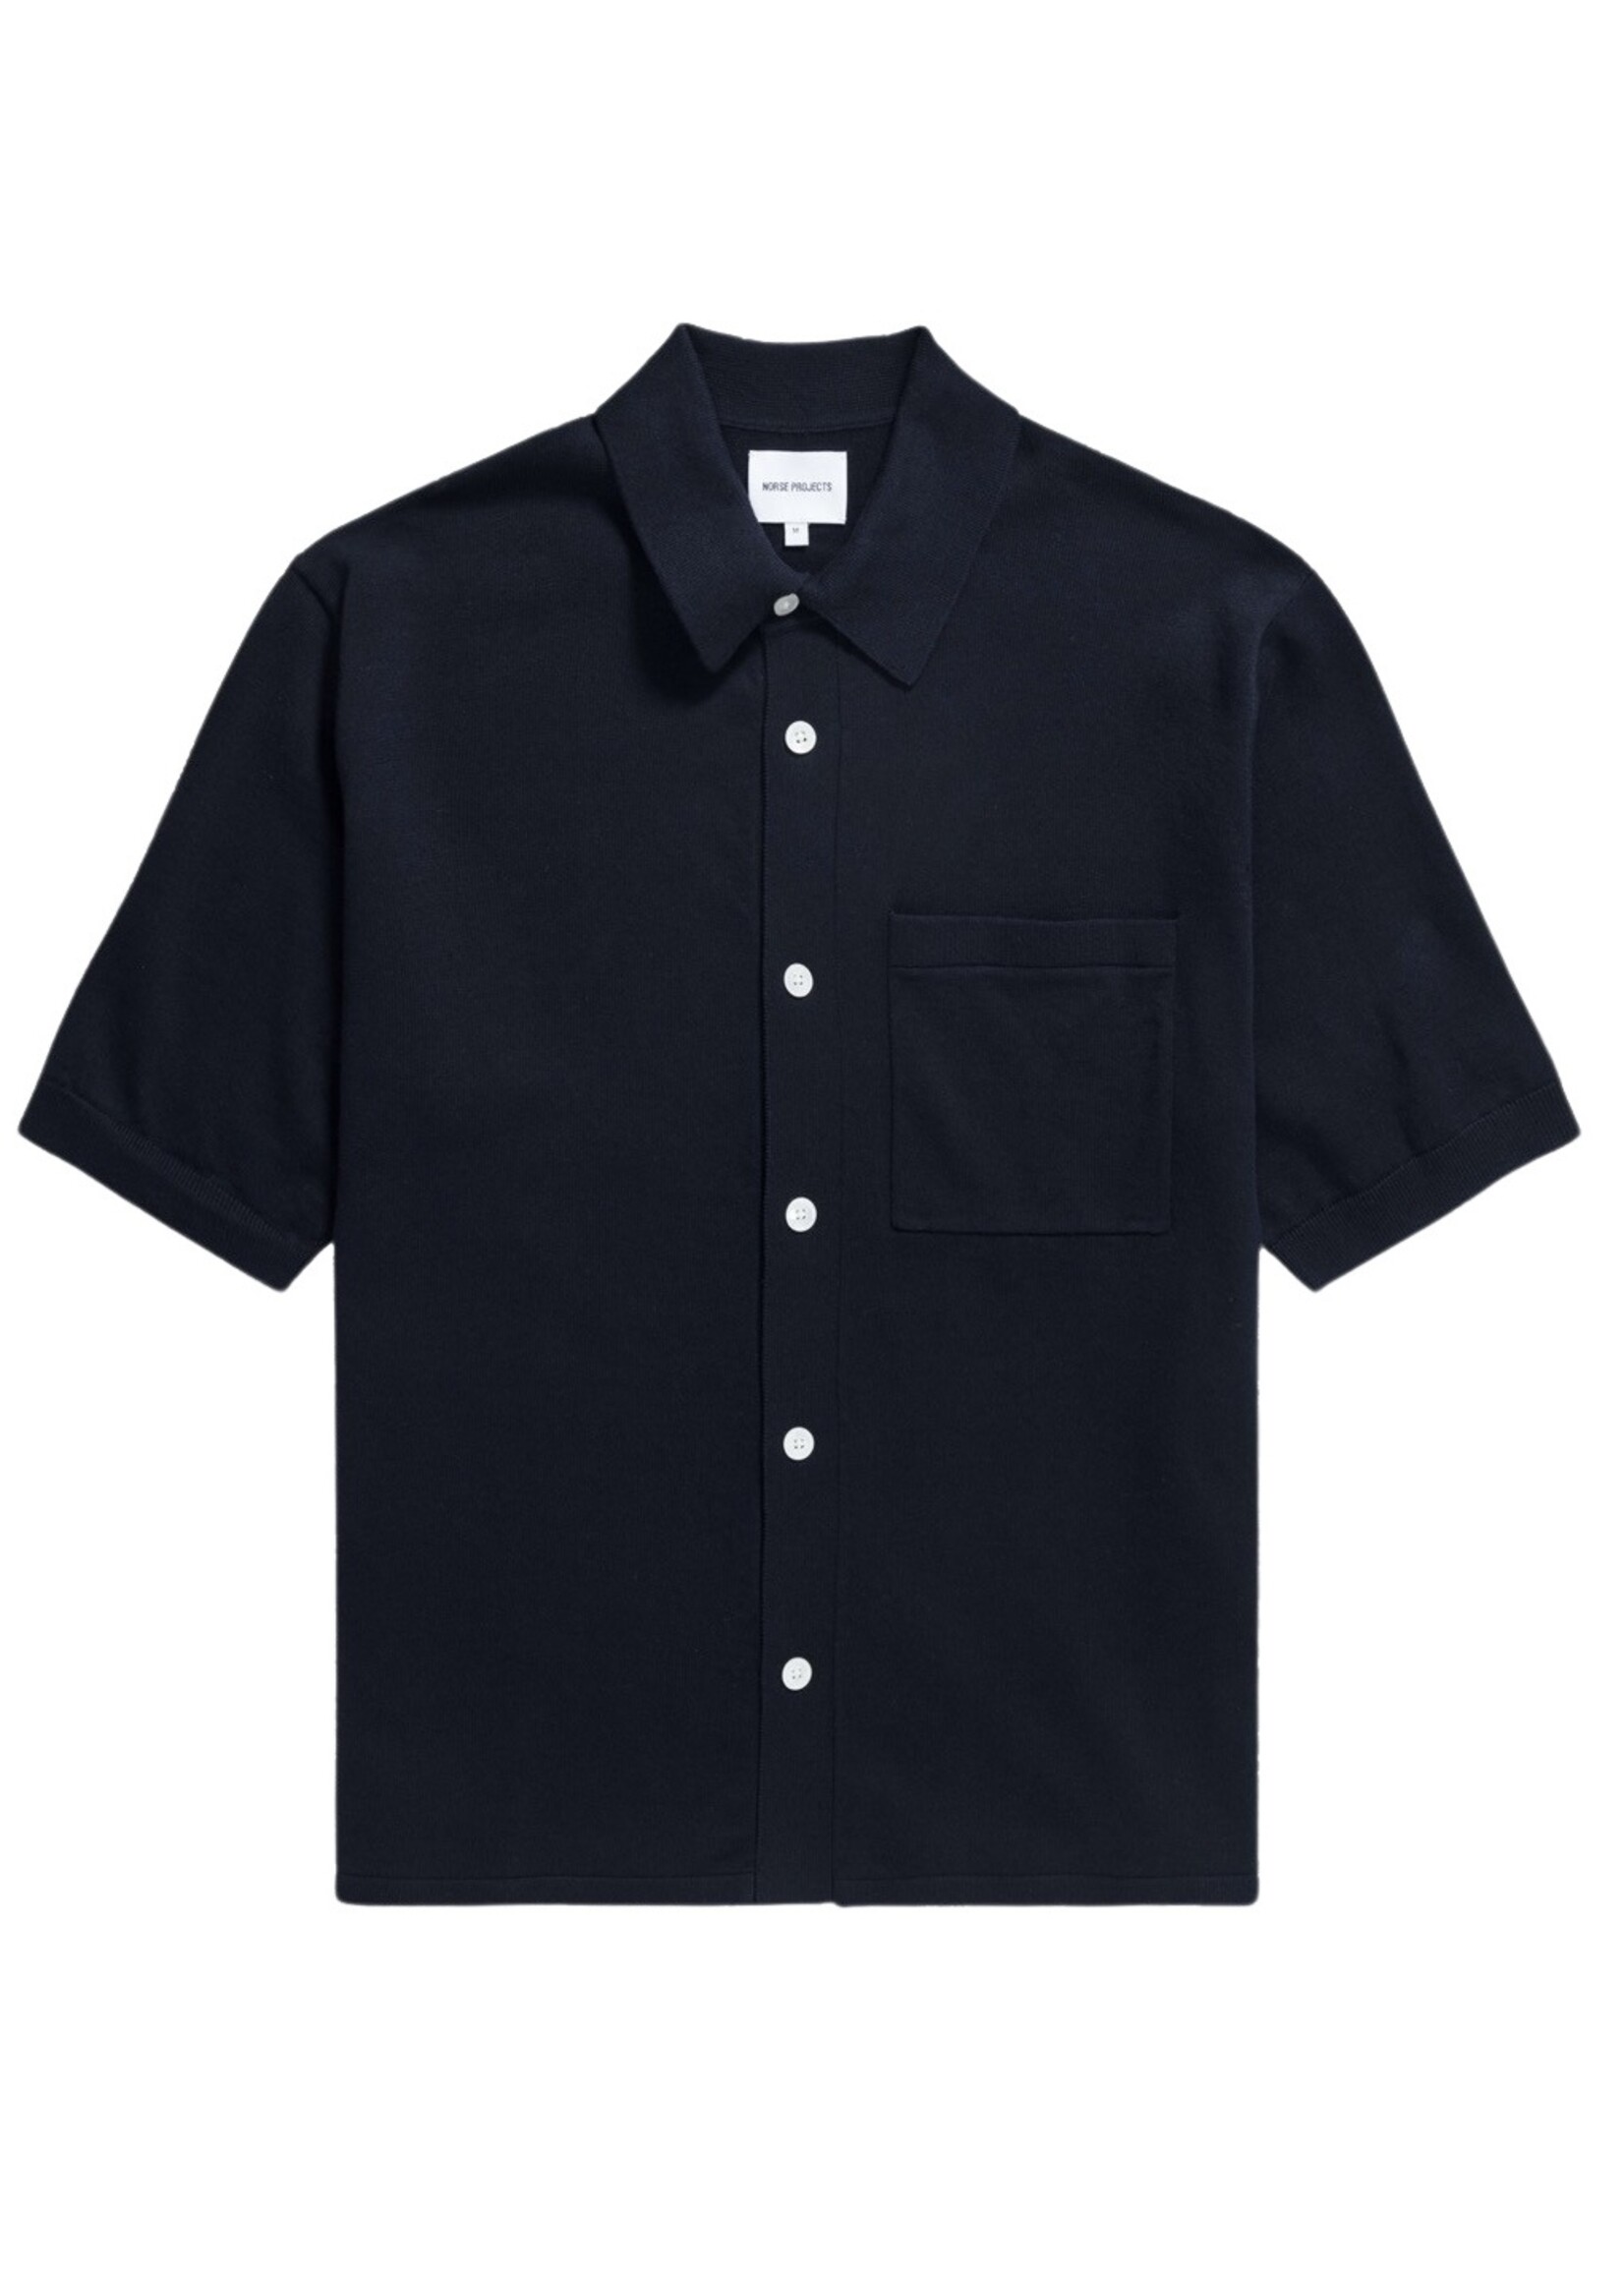 NORSE PROJECTS ROLLO COTTON/LINEN KNIT SHIRT